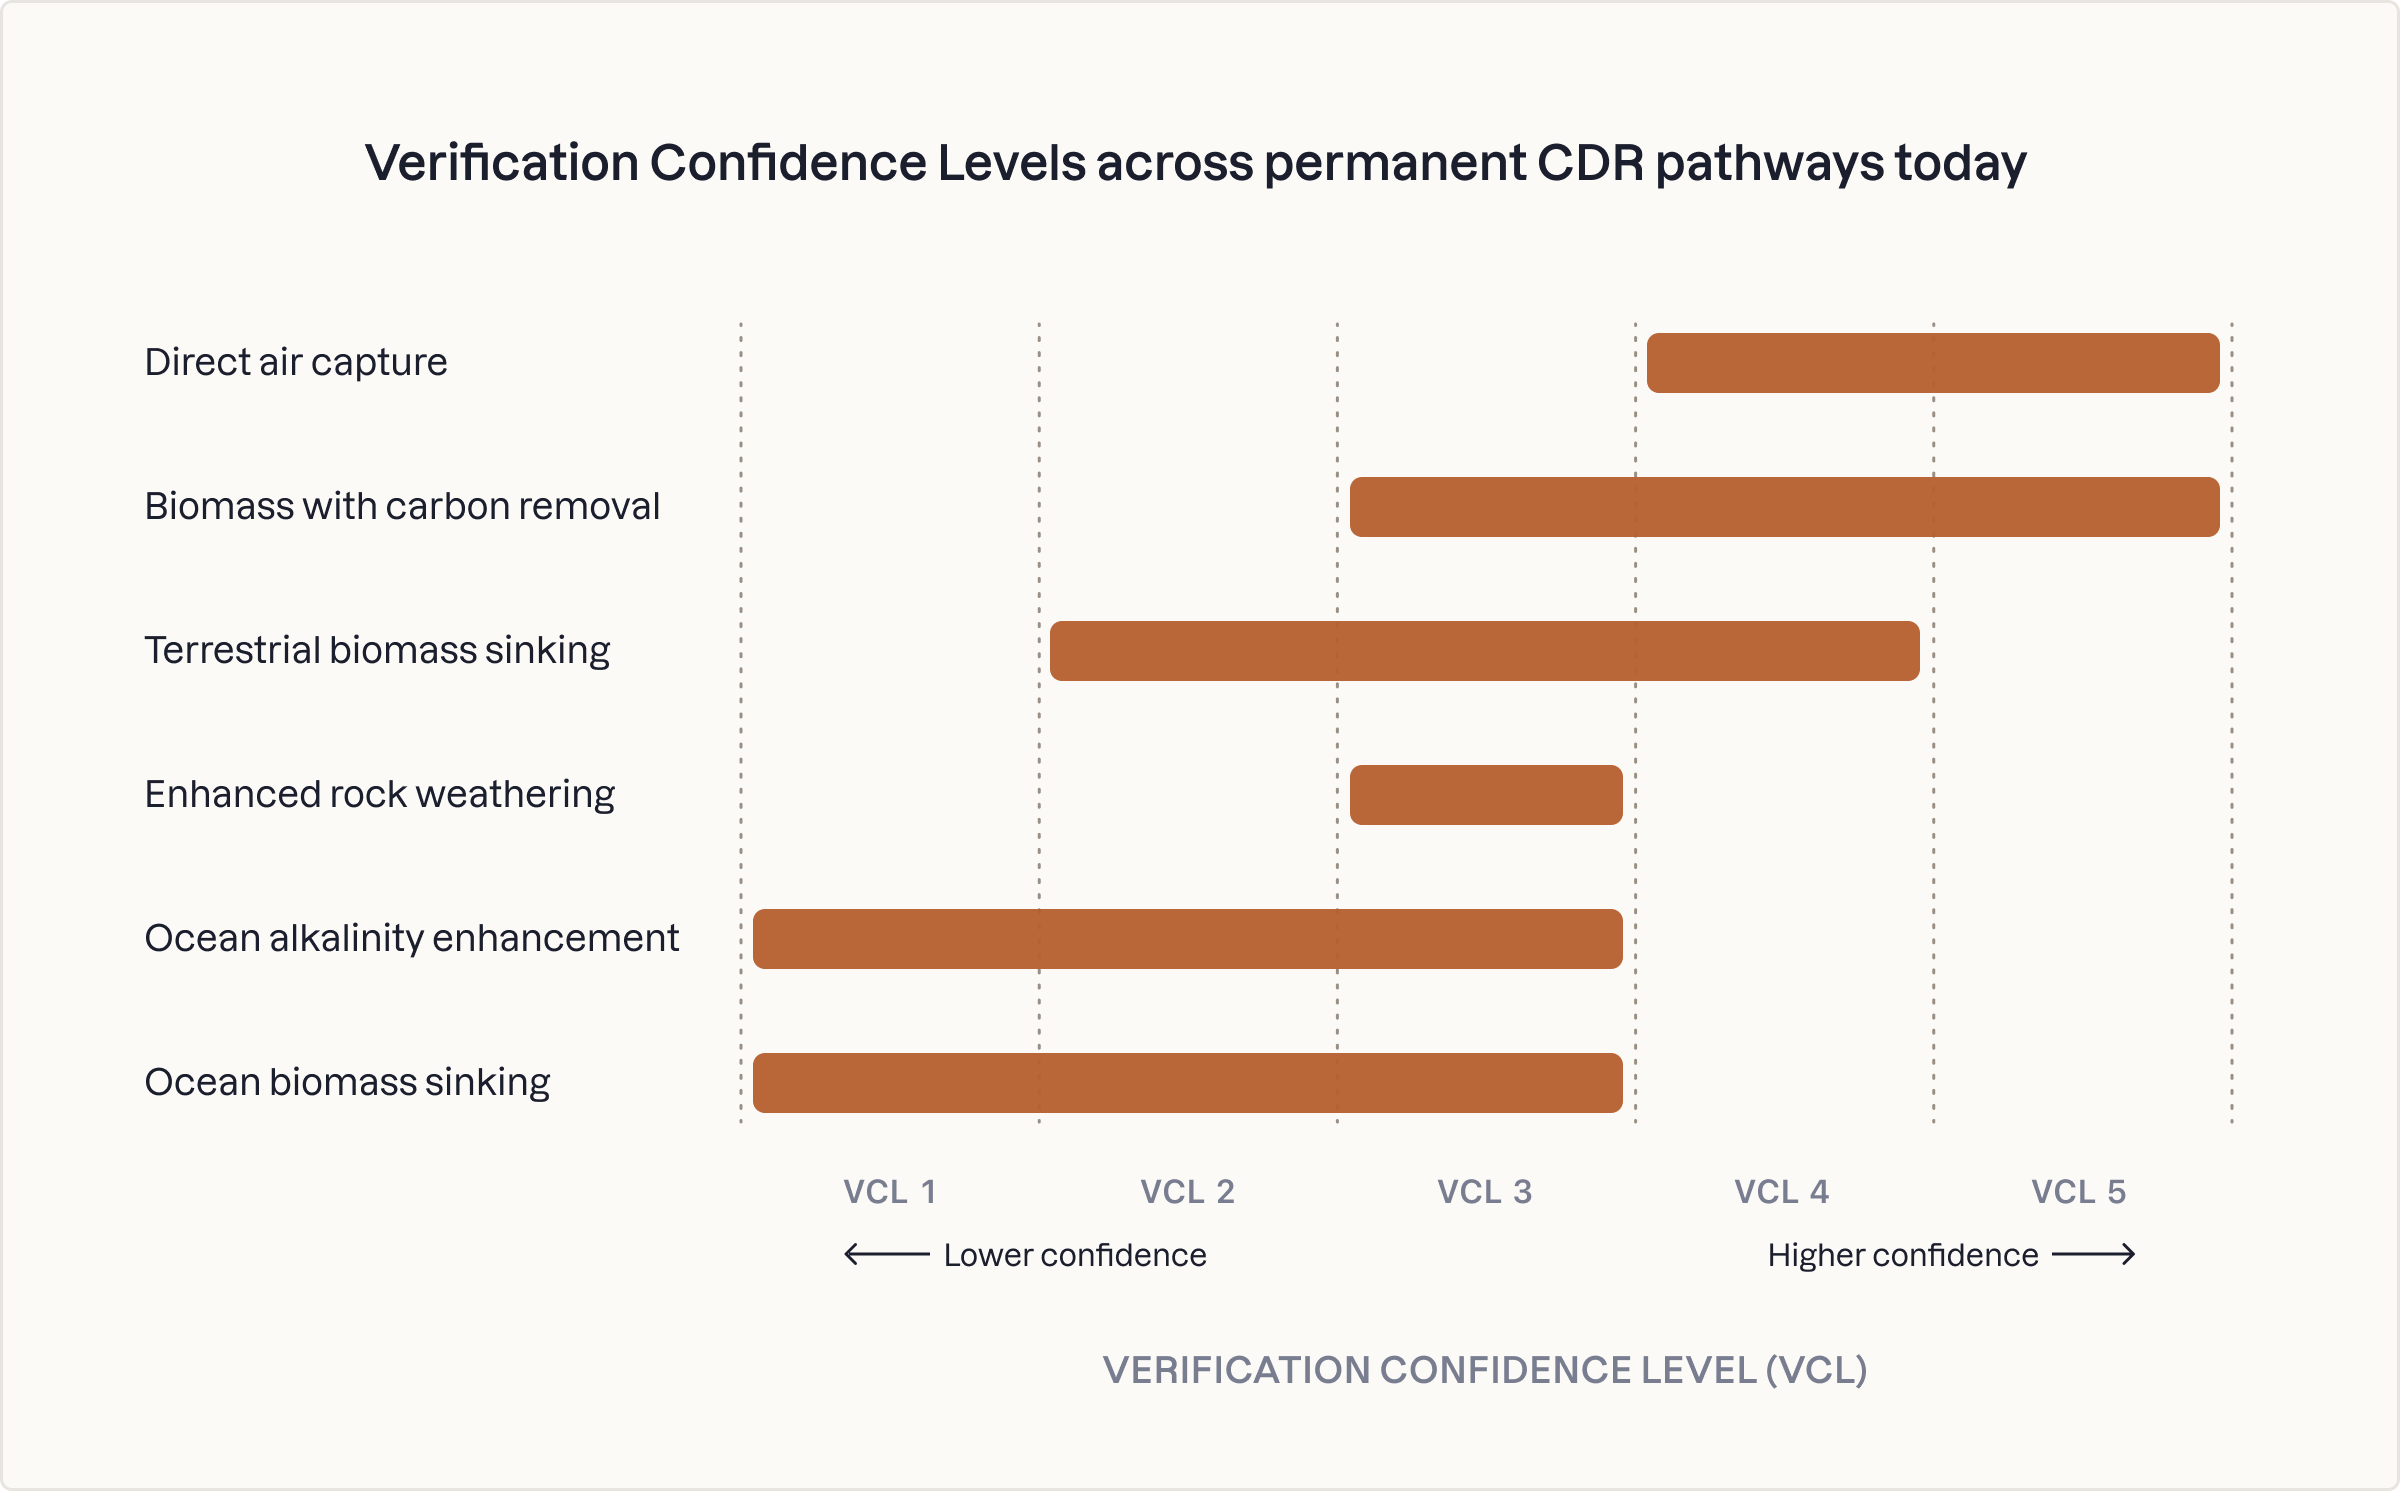 Verification confidence levels across permenant CDR pathways today